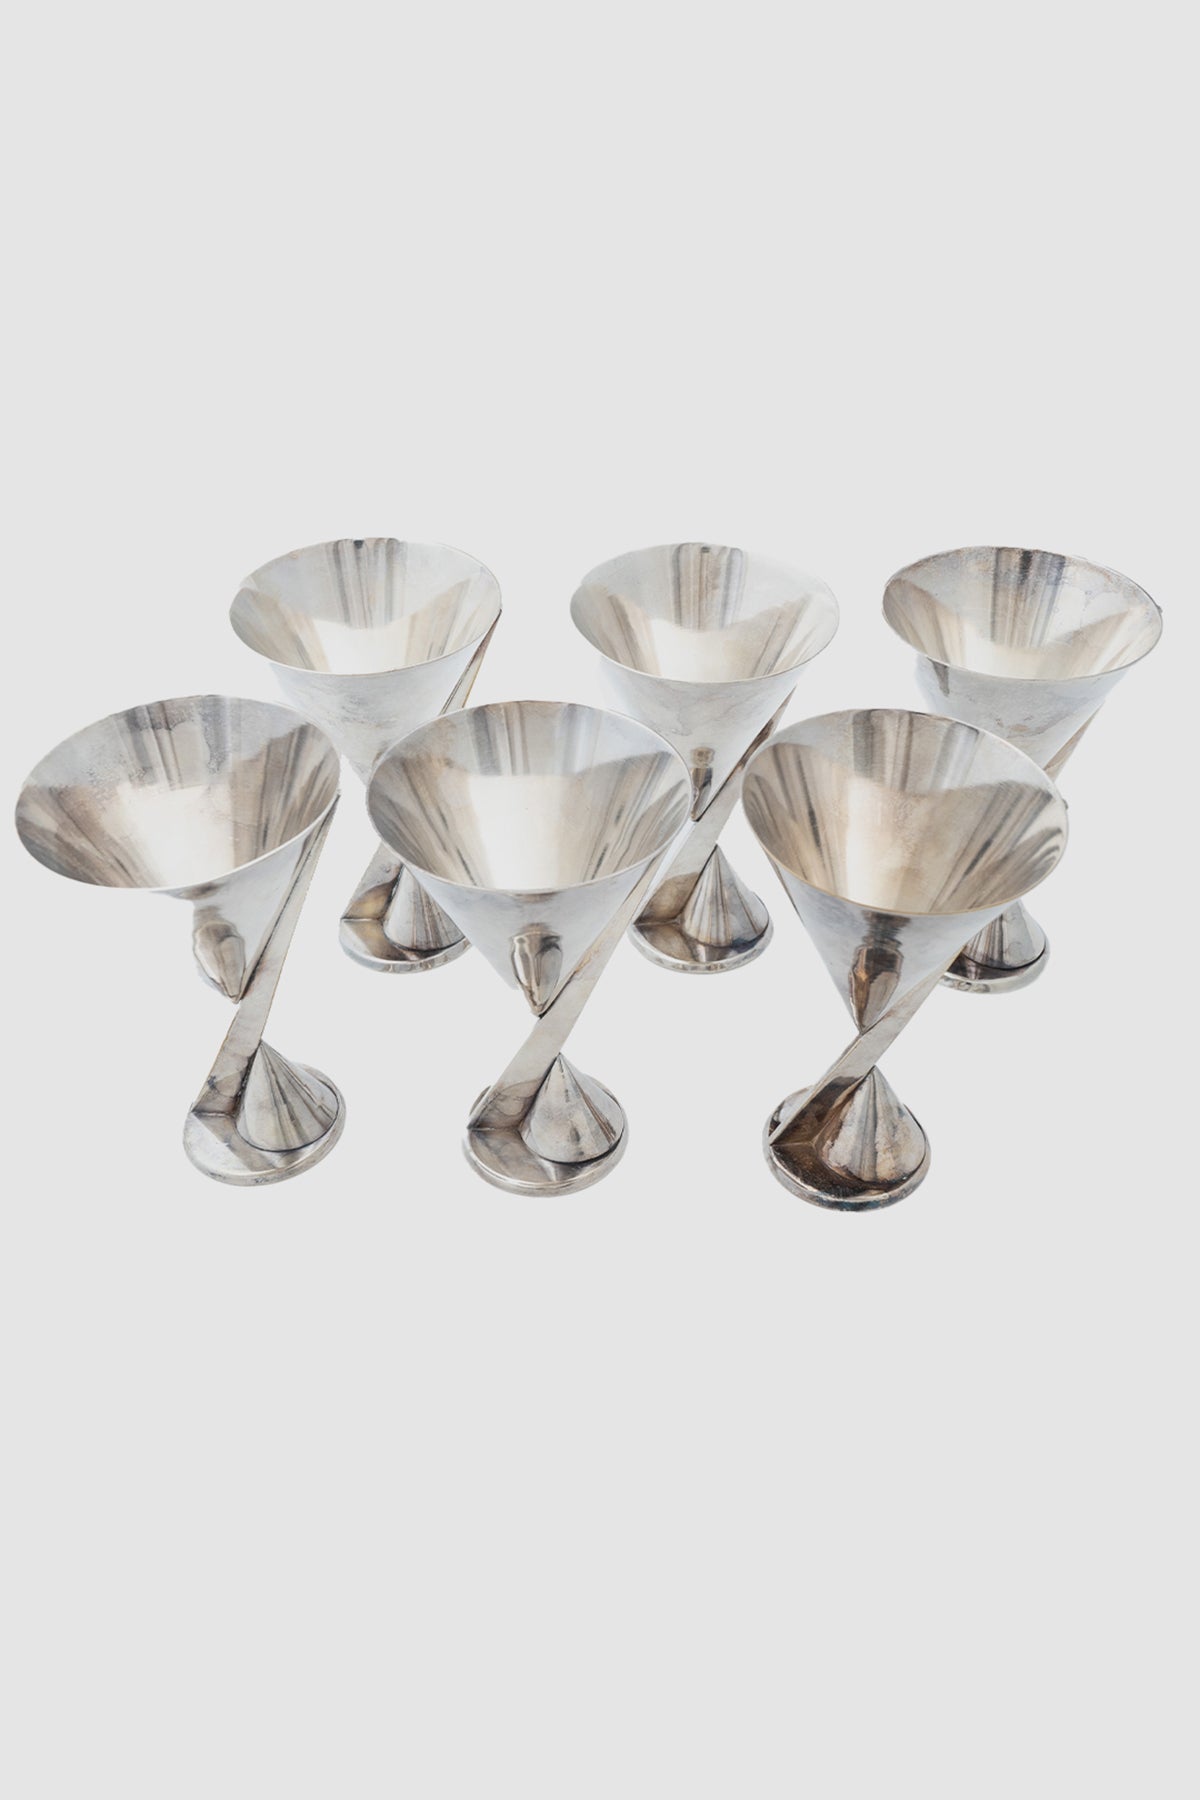 MAXFIELD COLLECTION | SET OF 10 VINTAGE SILVER GOBLETS